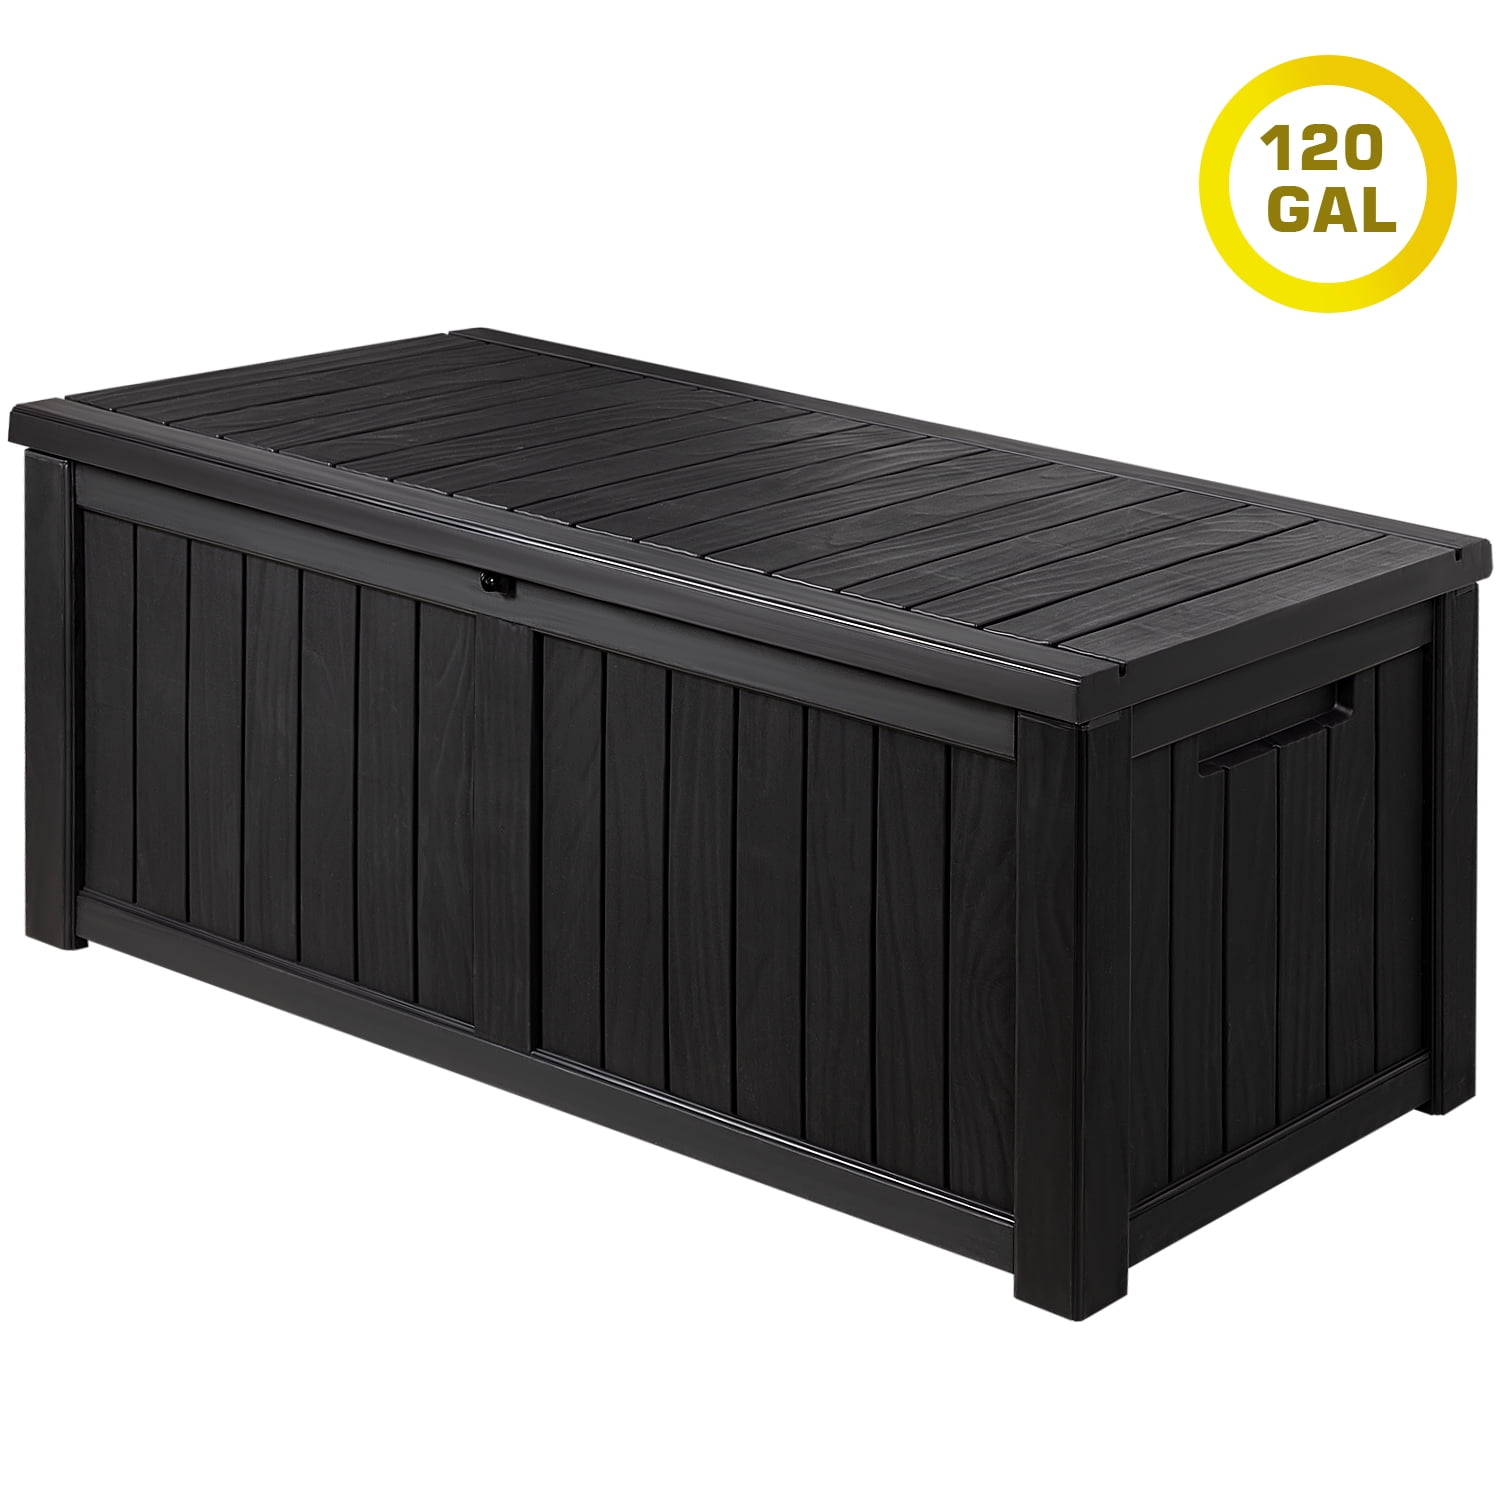 Outdoor Garden Patio Storage Box Container Chest Large Plastic Mini Shed Unit 